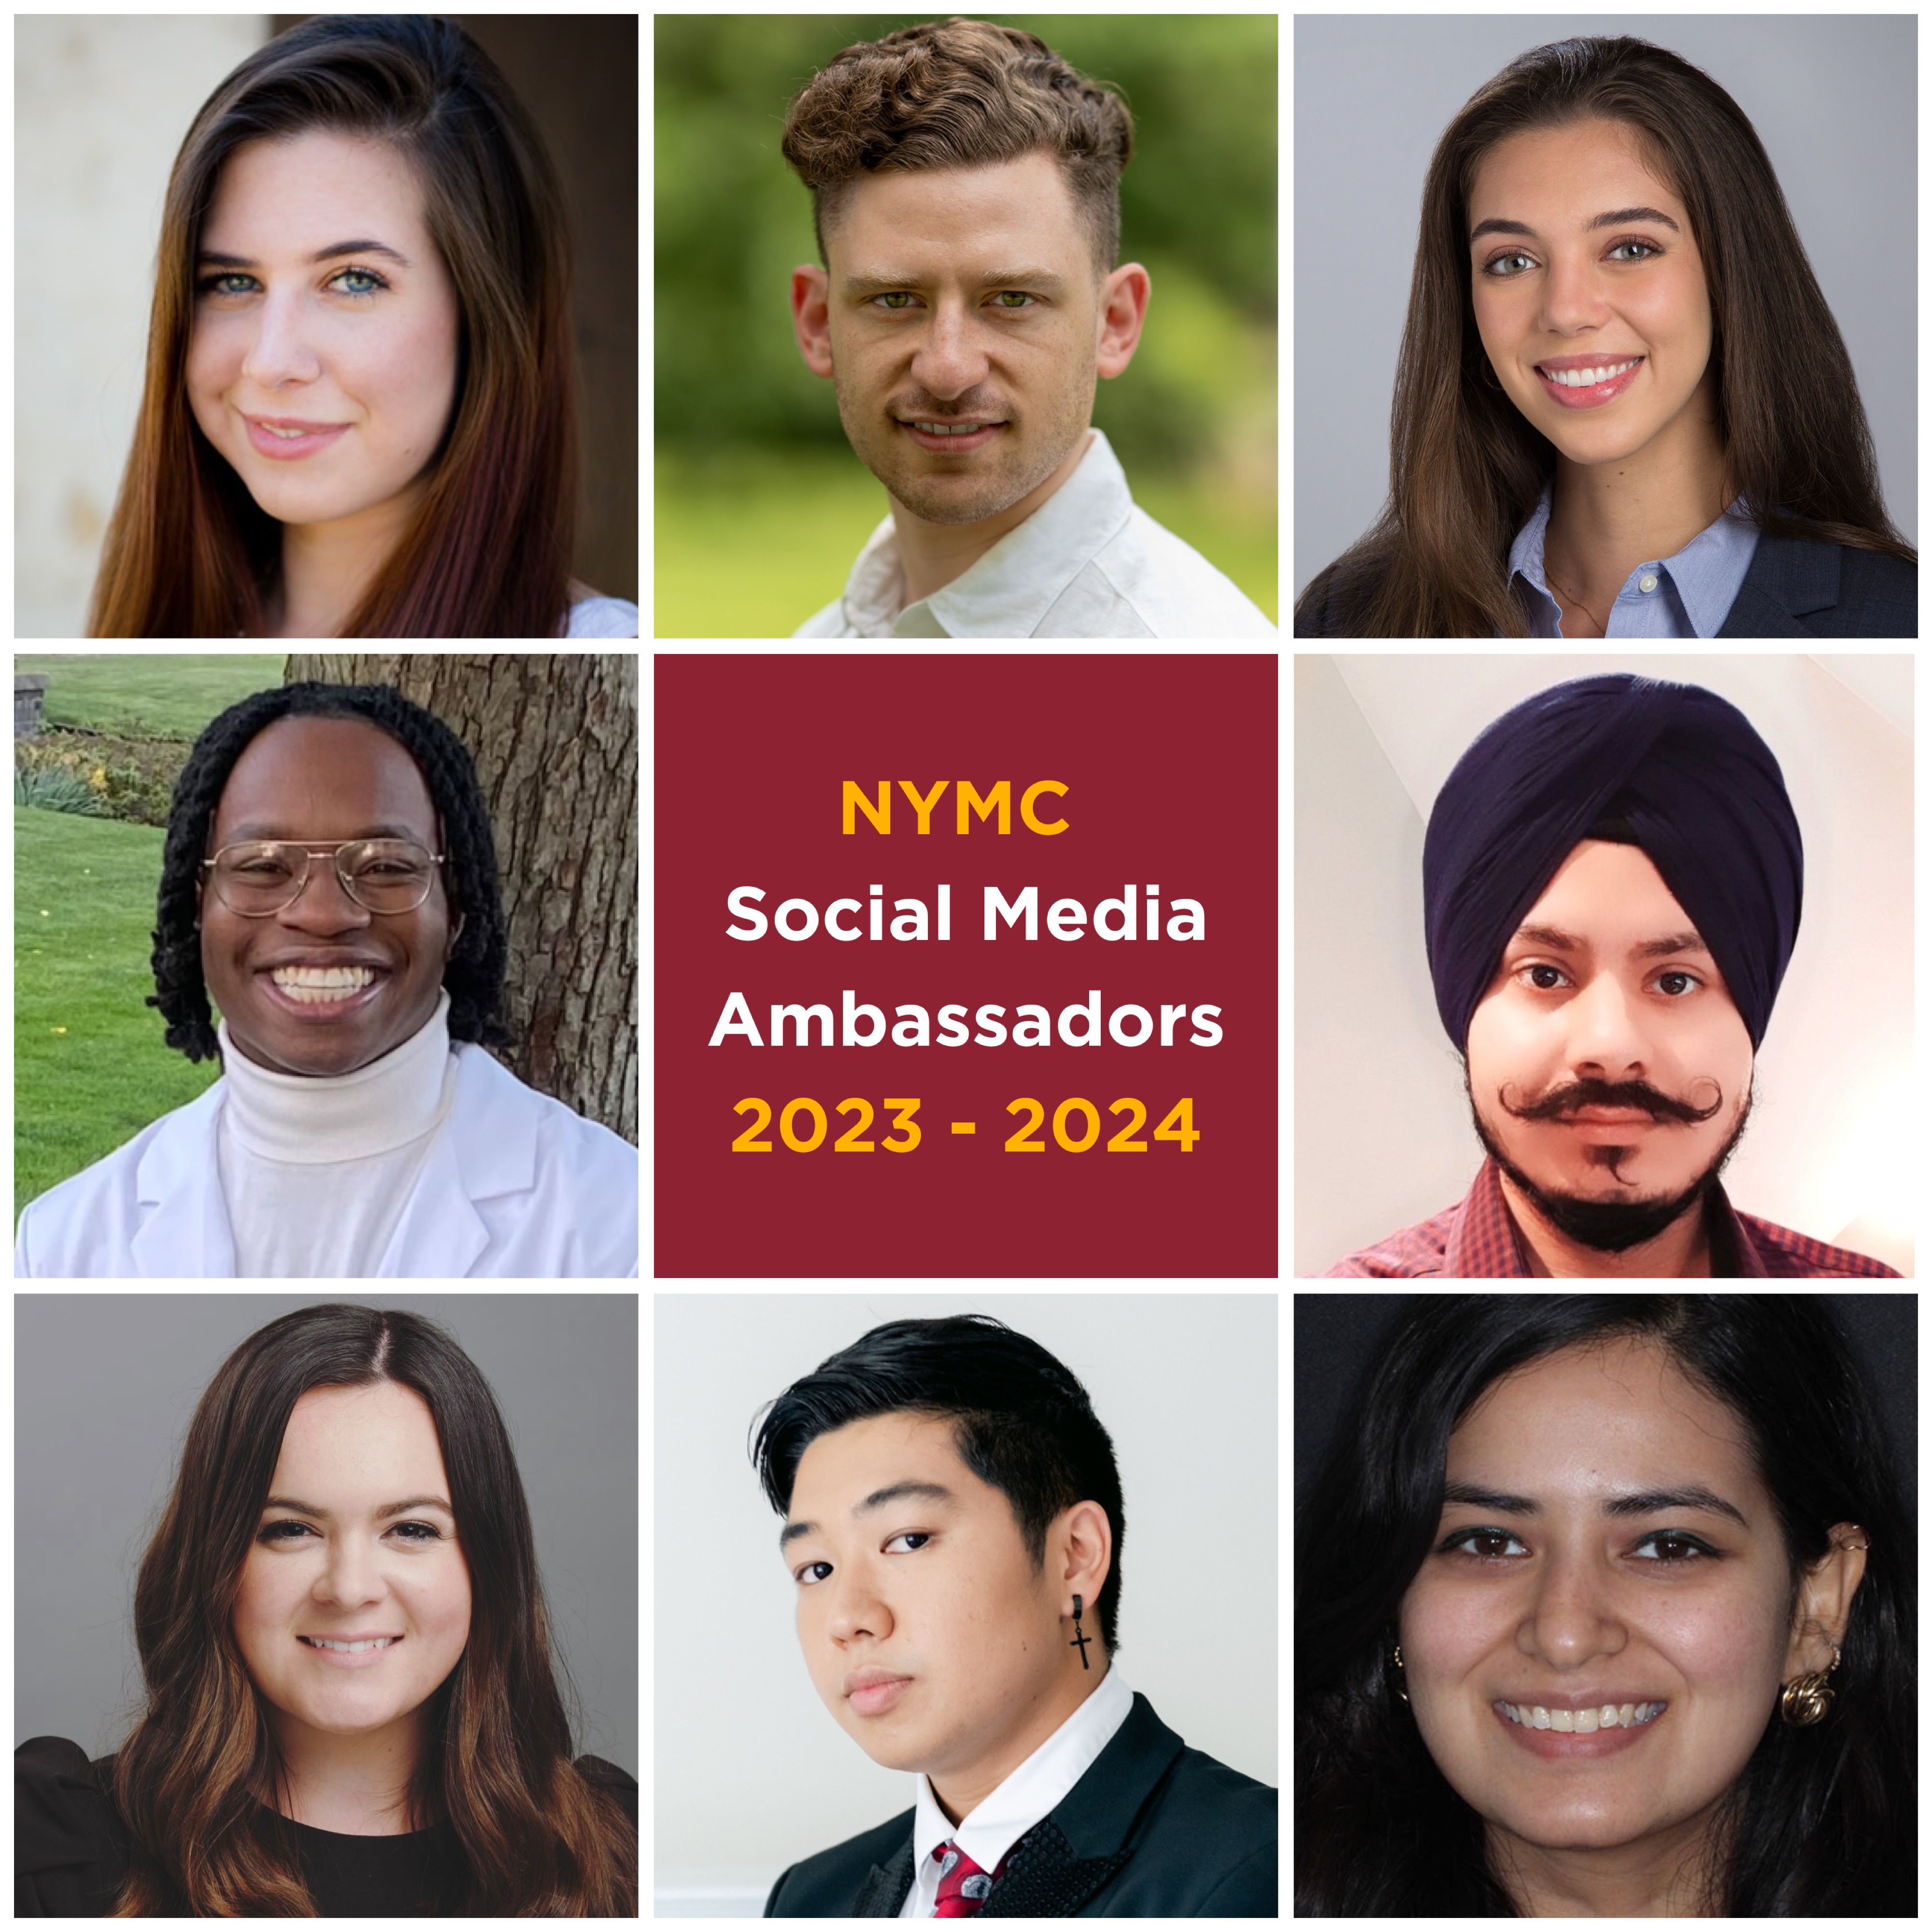 A 3 by 3 square grid with 8 students around a maroon sign that says NYMC Social Media Ambassadors 2023-2024